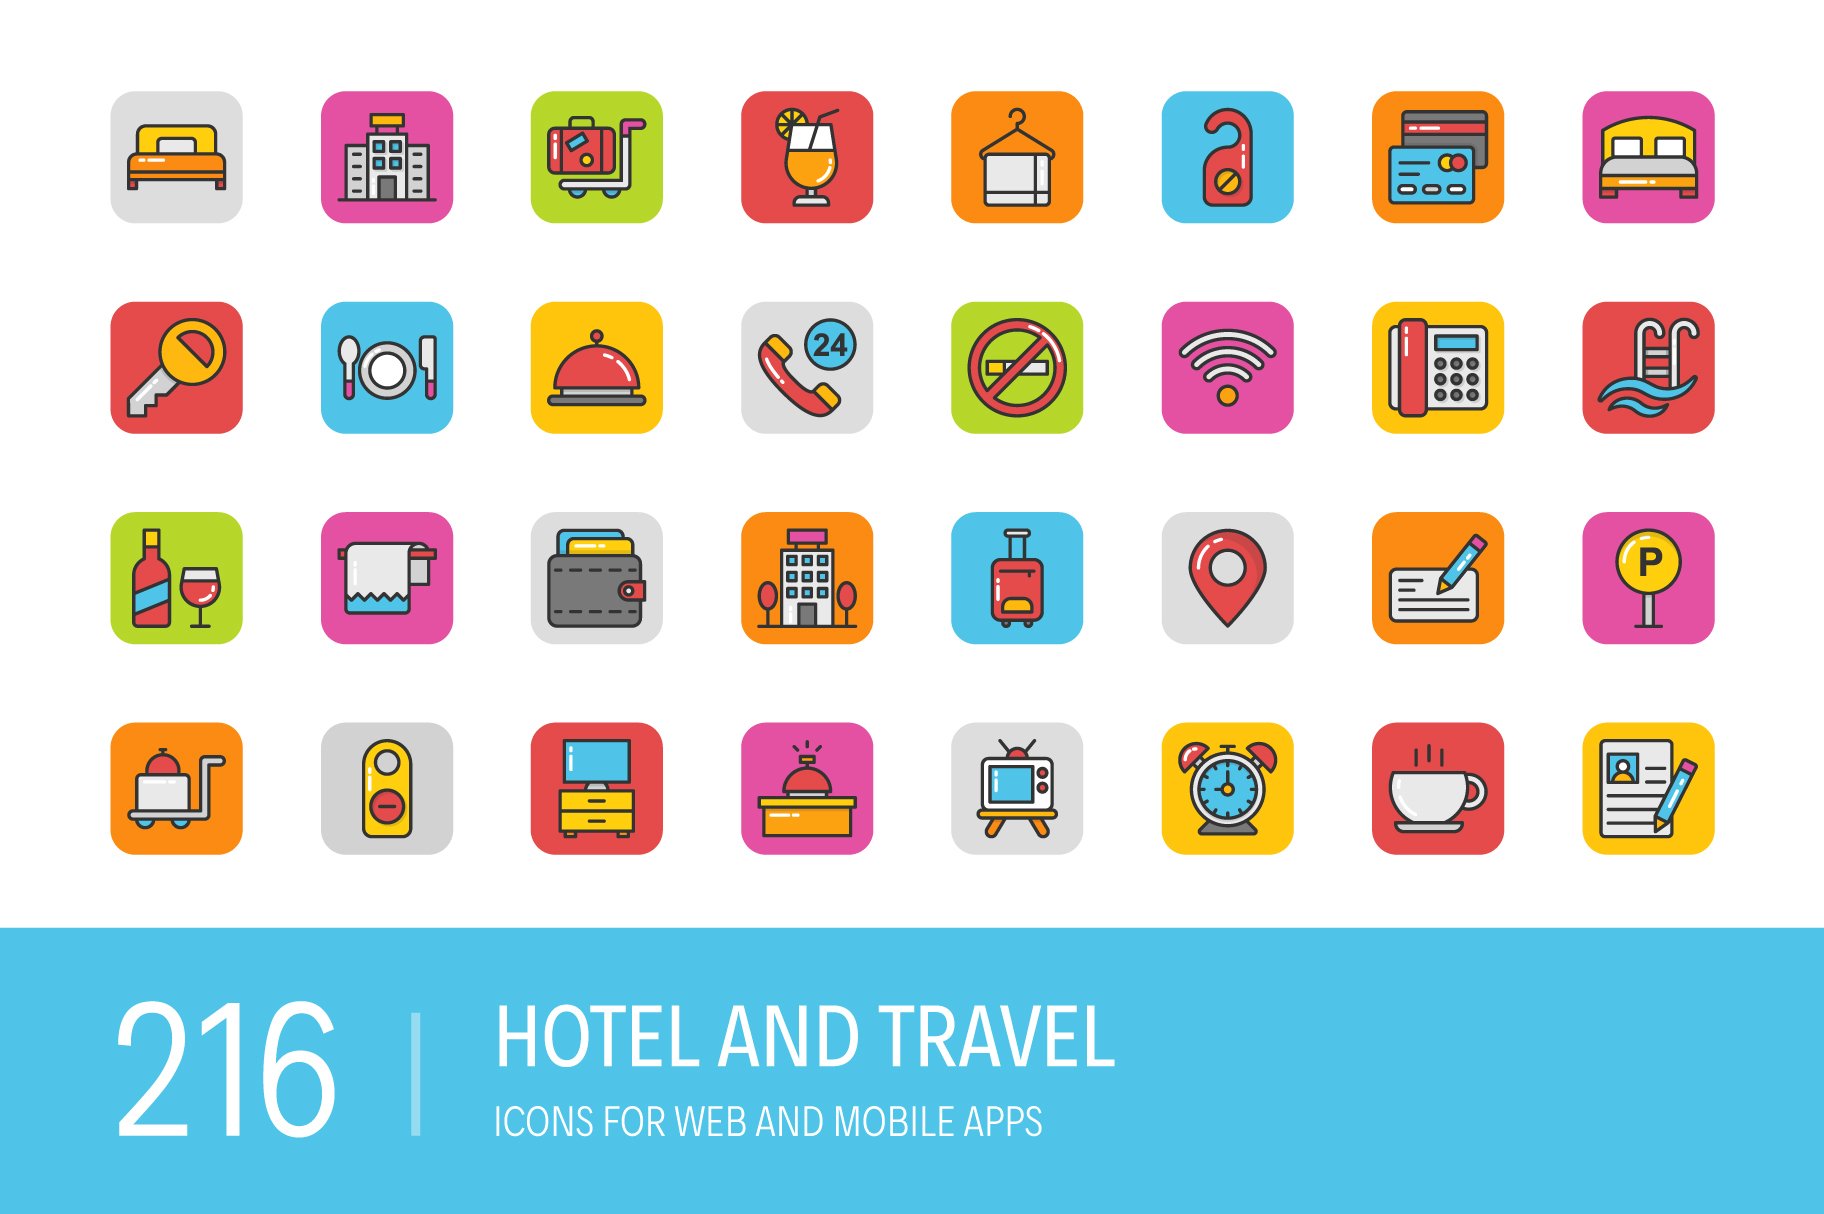 216 Hotel and Travel Icons cover image.